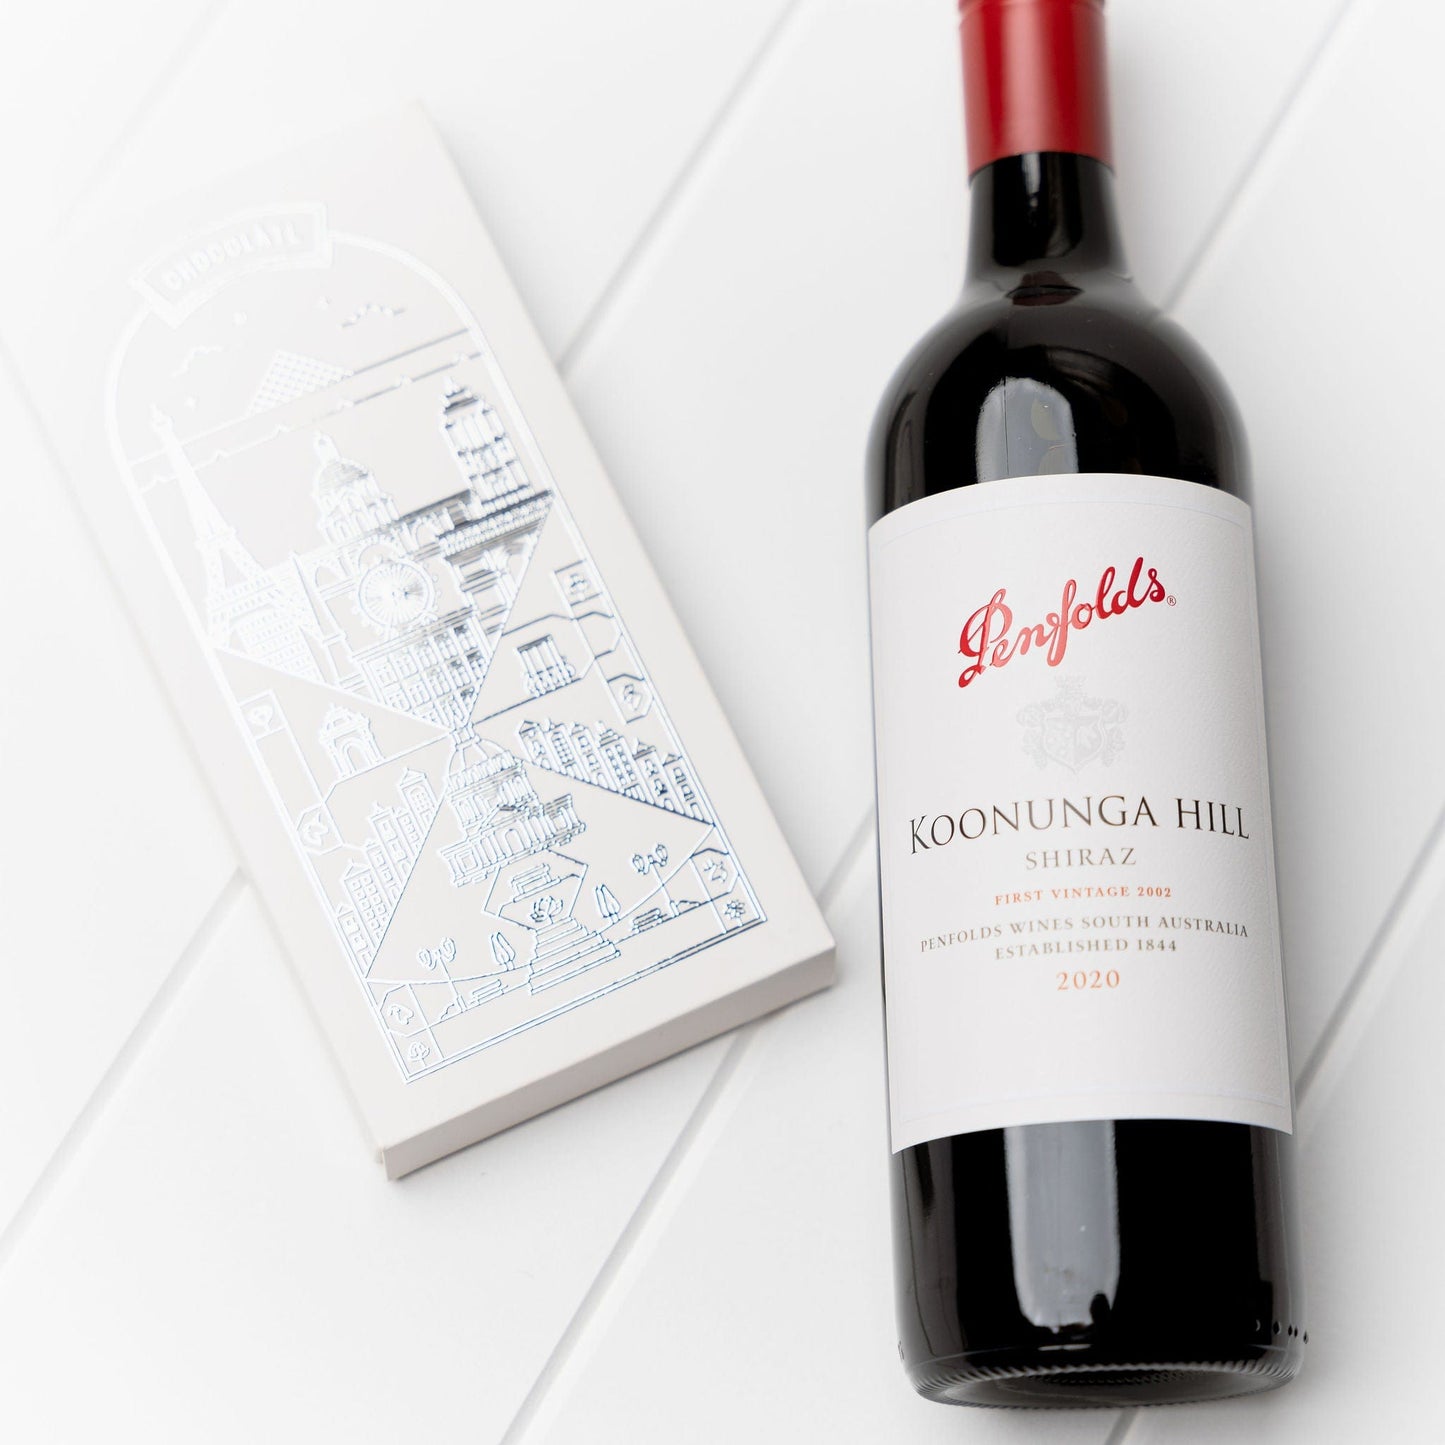 The Penfolds Pairing